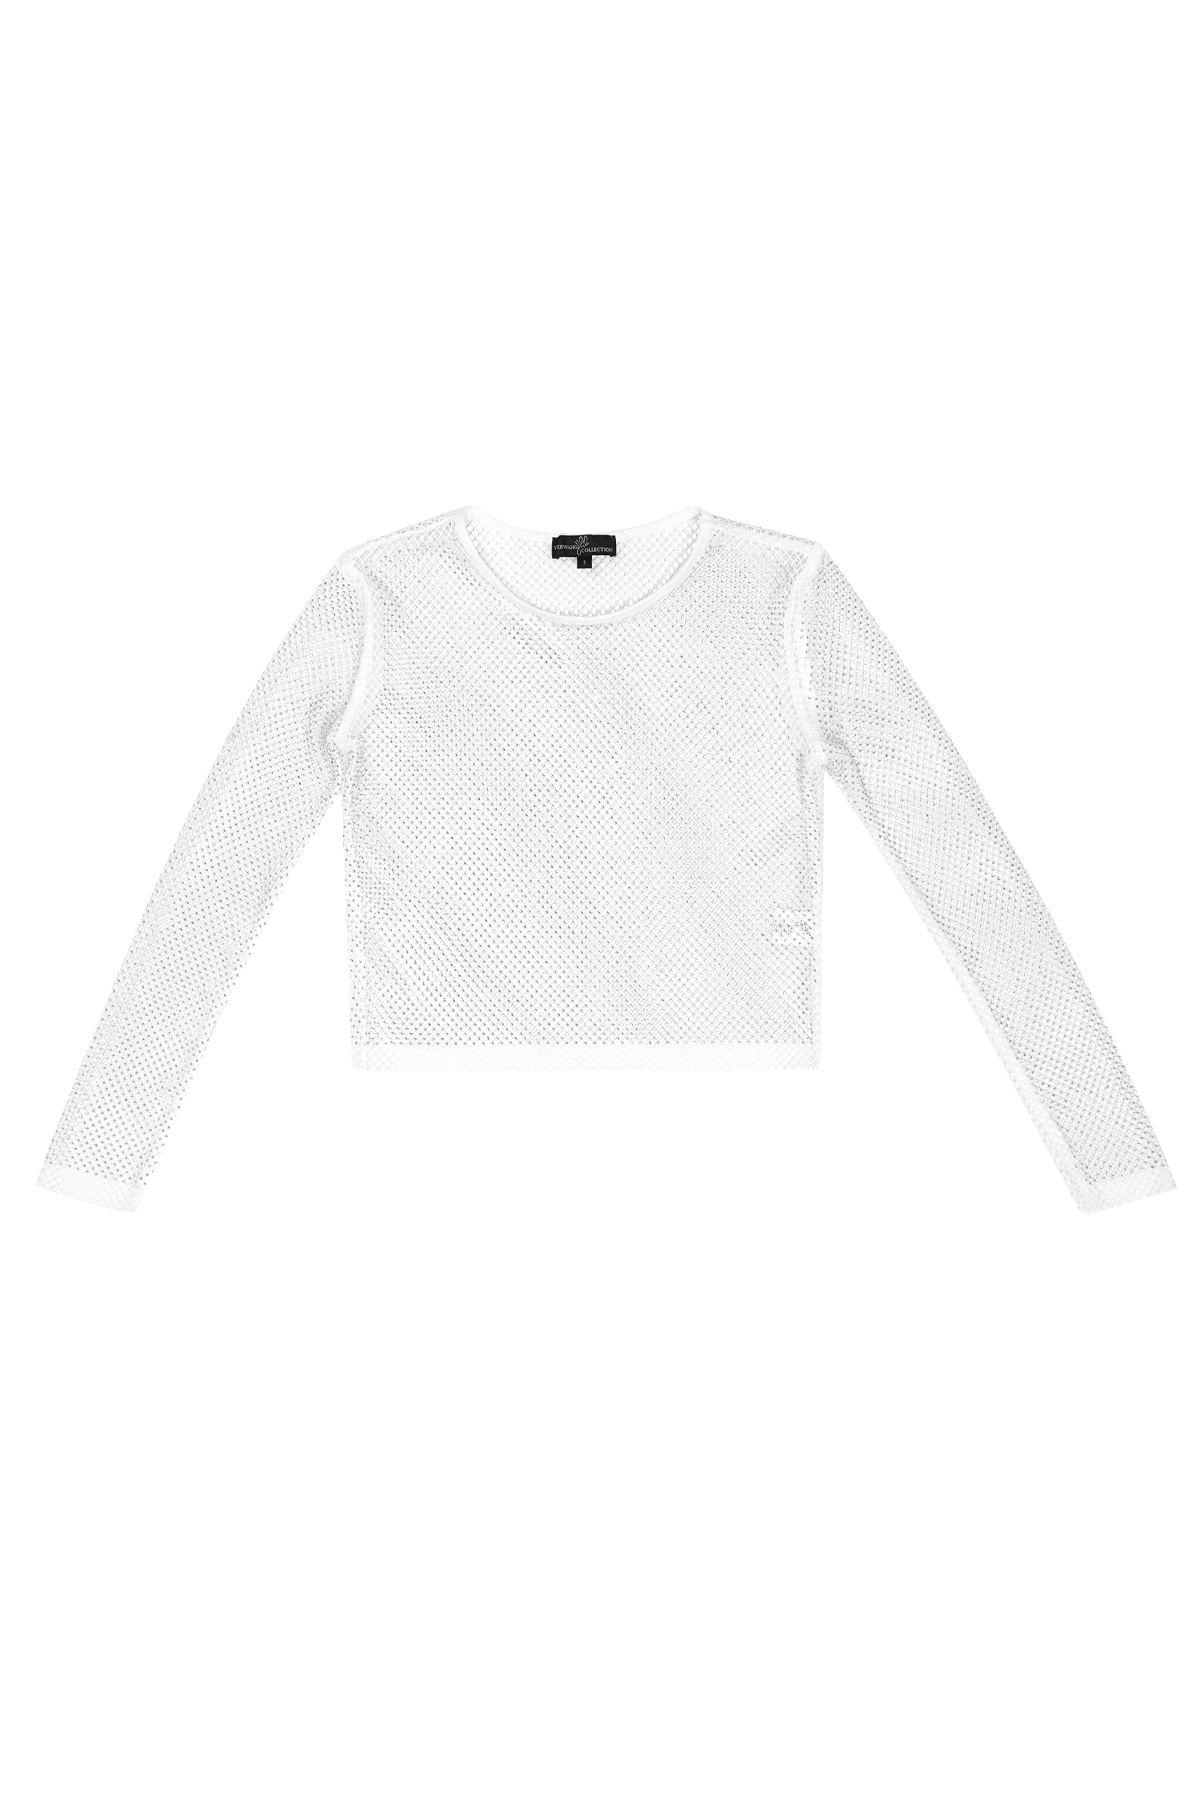 Sparkly long sleeve top - white - M 